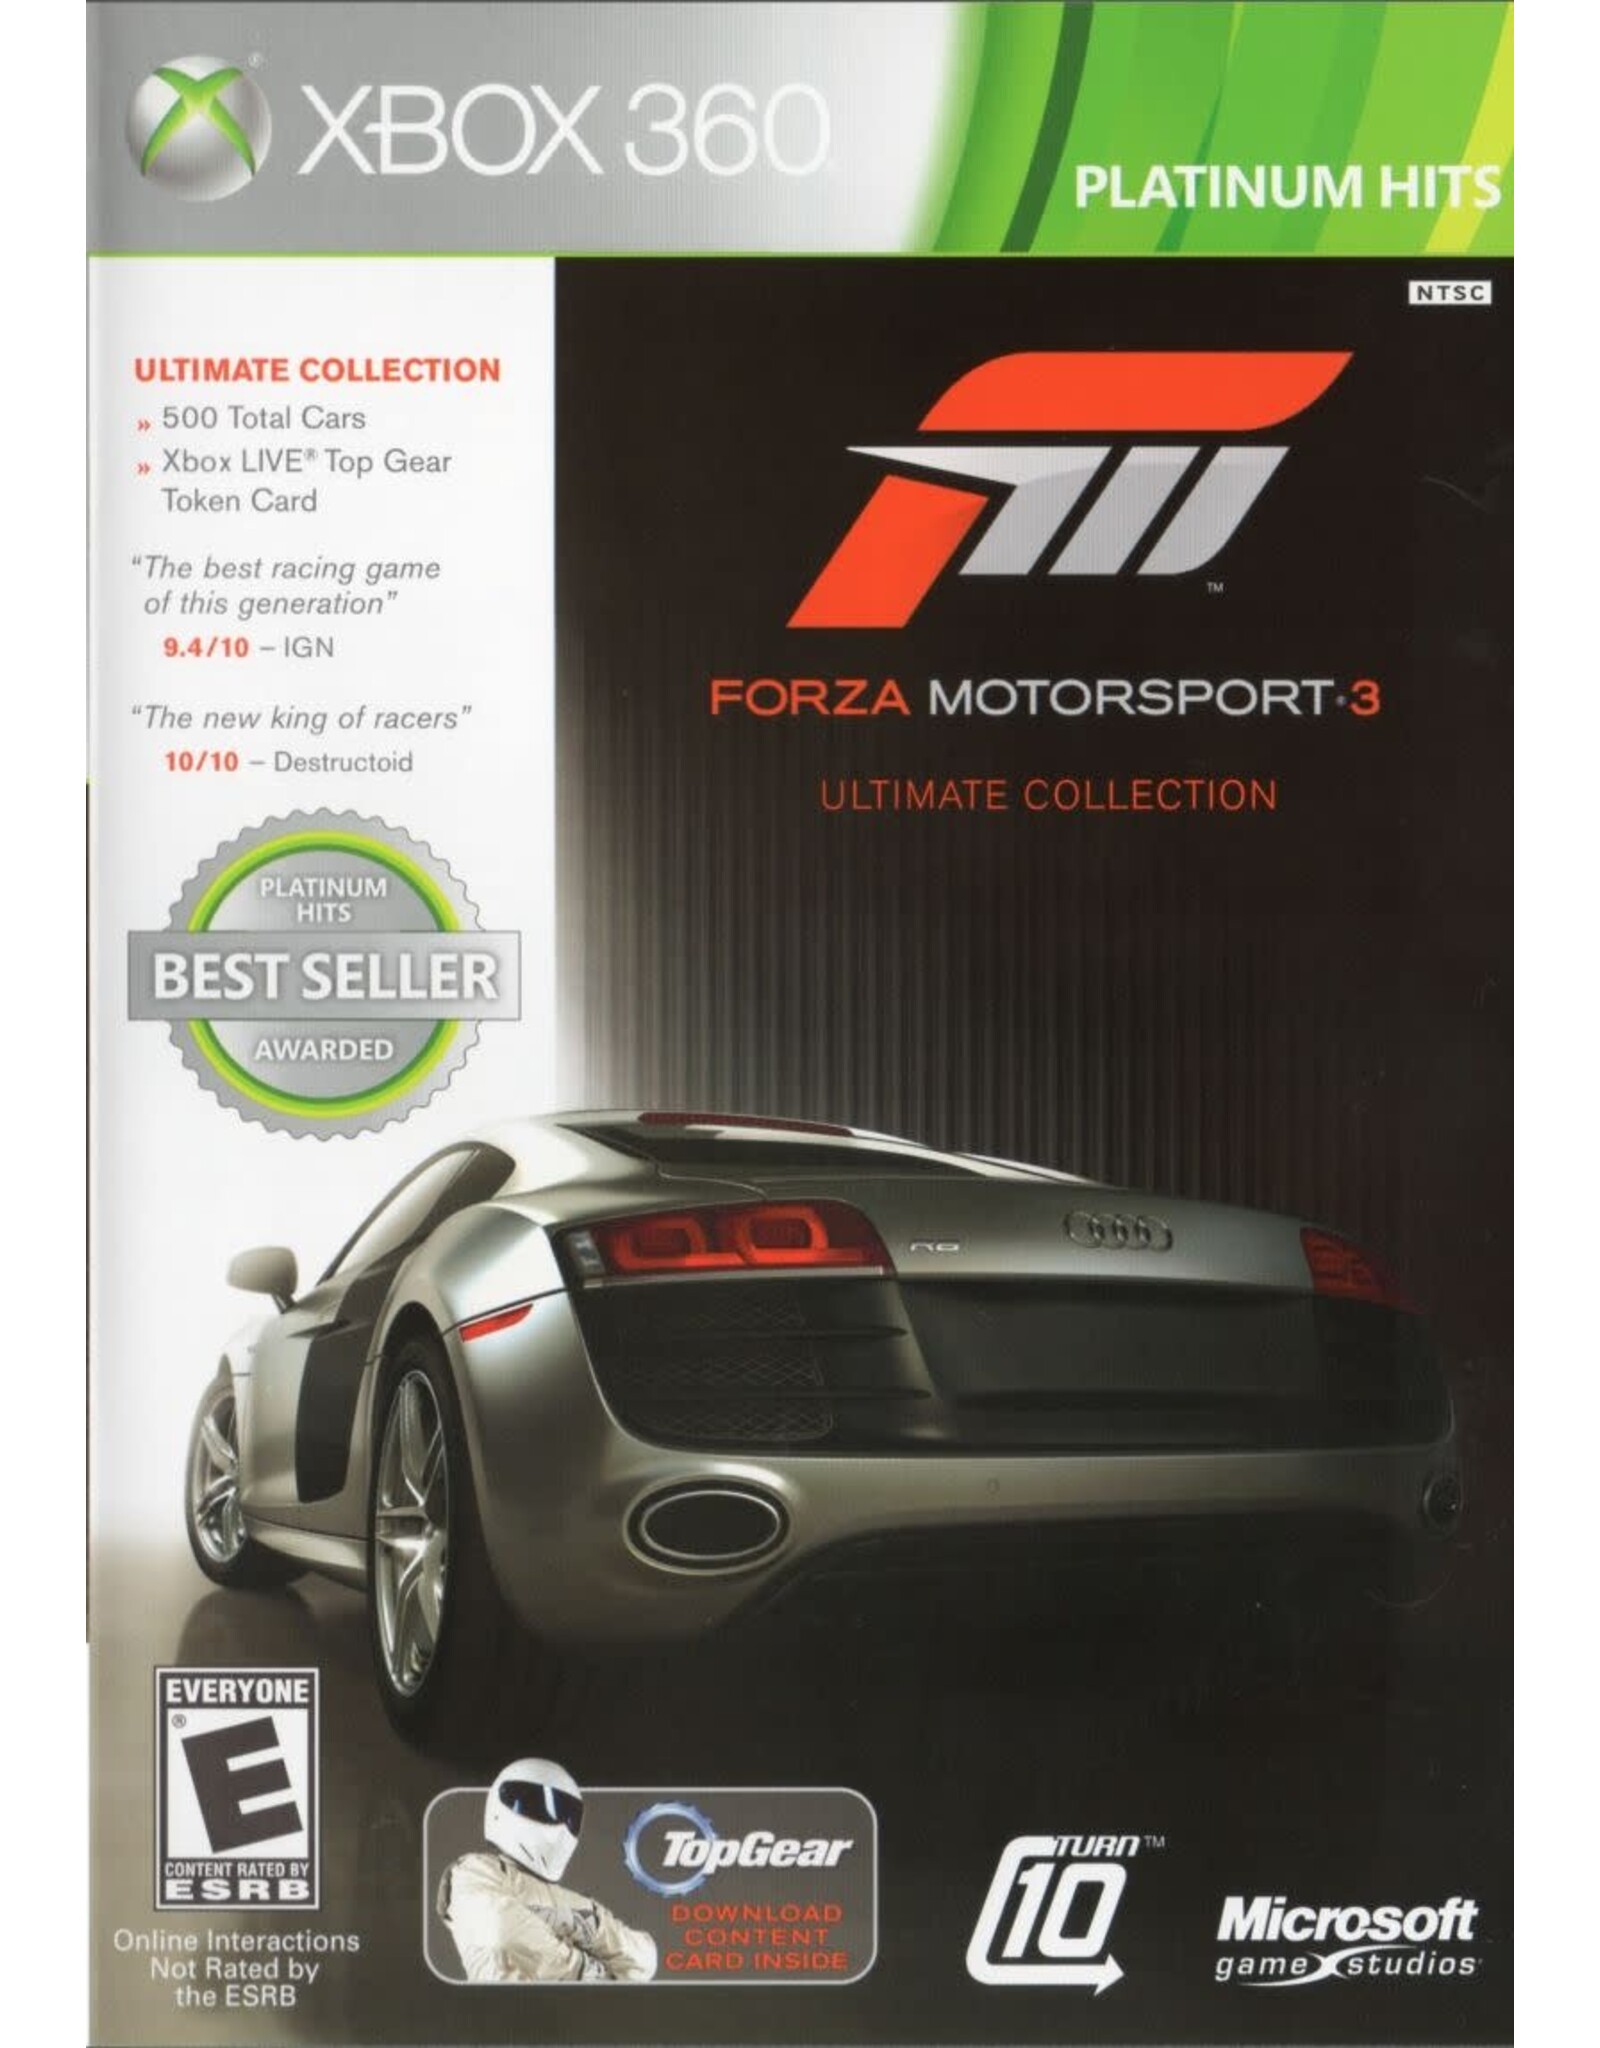 Xbox 360 Forza Motorsport 3 Ultimate Collection - Platinum Hits (Used)